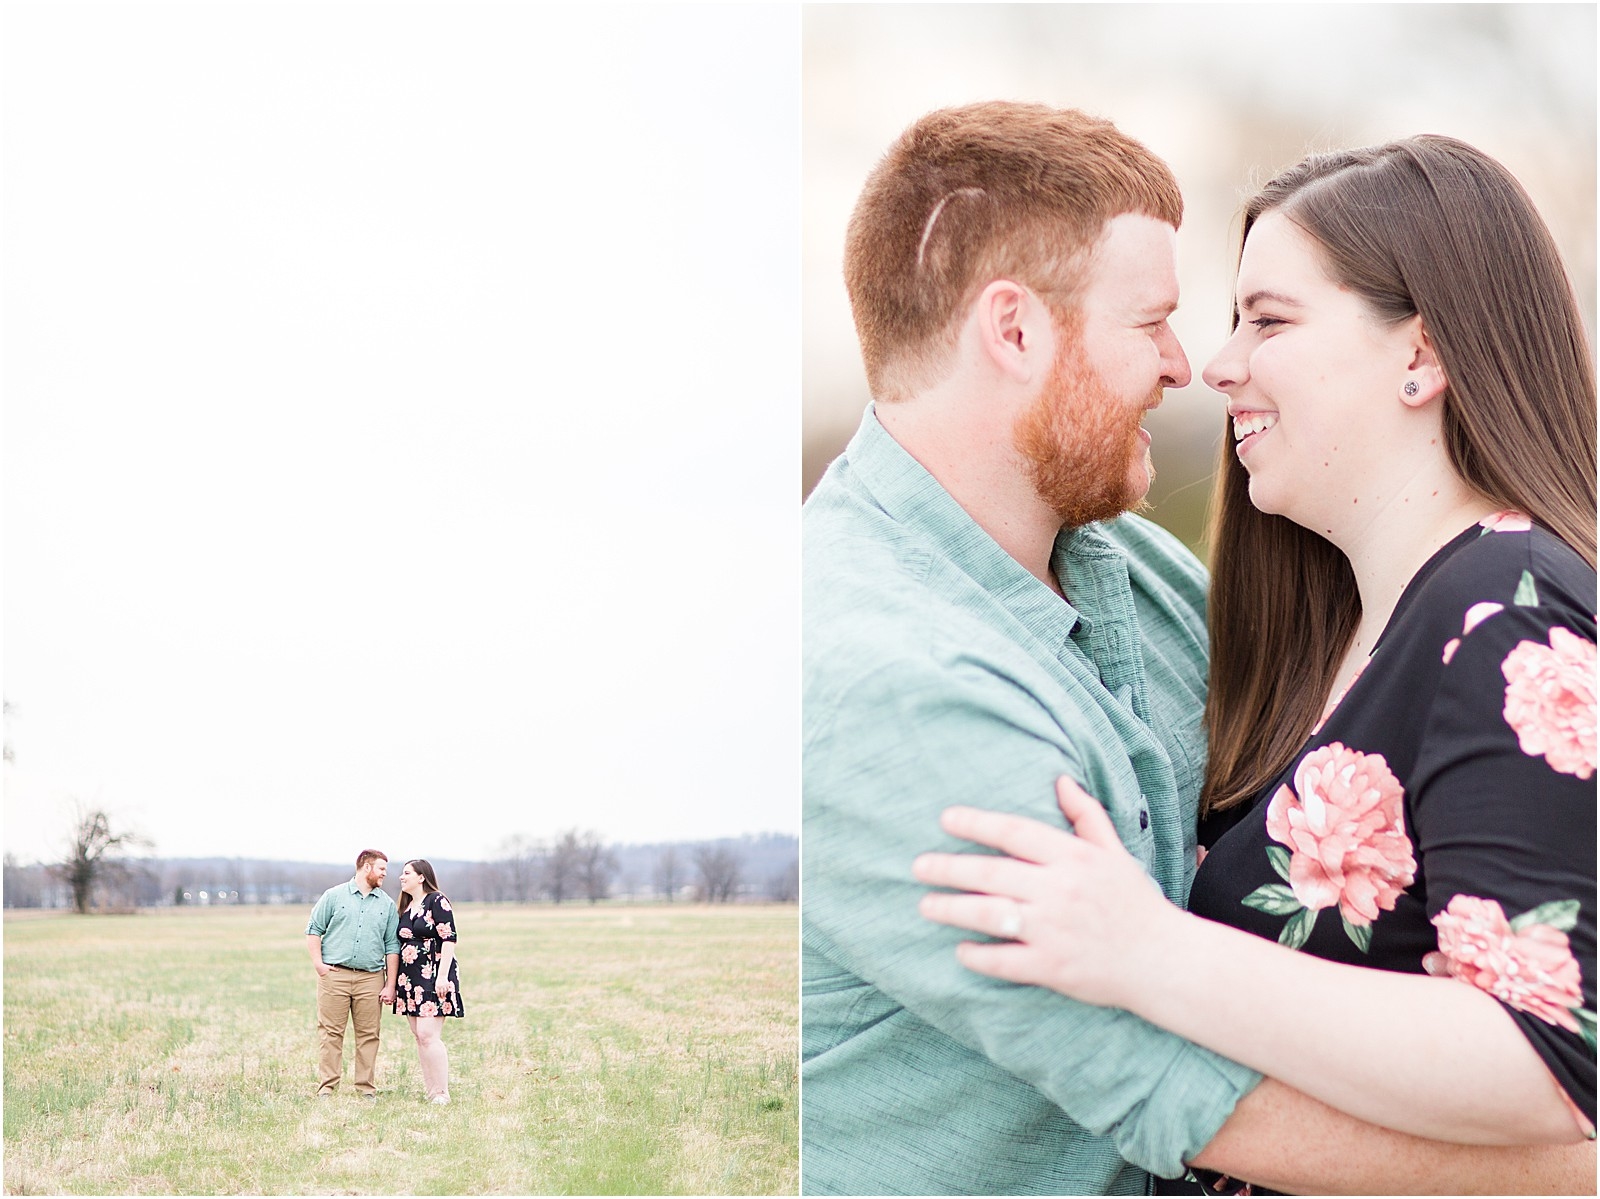 Jocelyn and Austin | Rockport Indiana Engament Session017.jpg